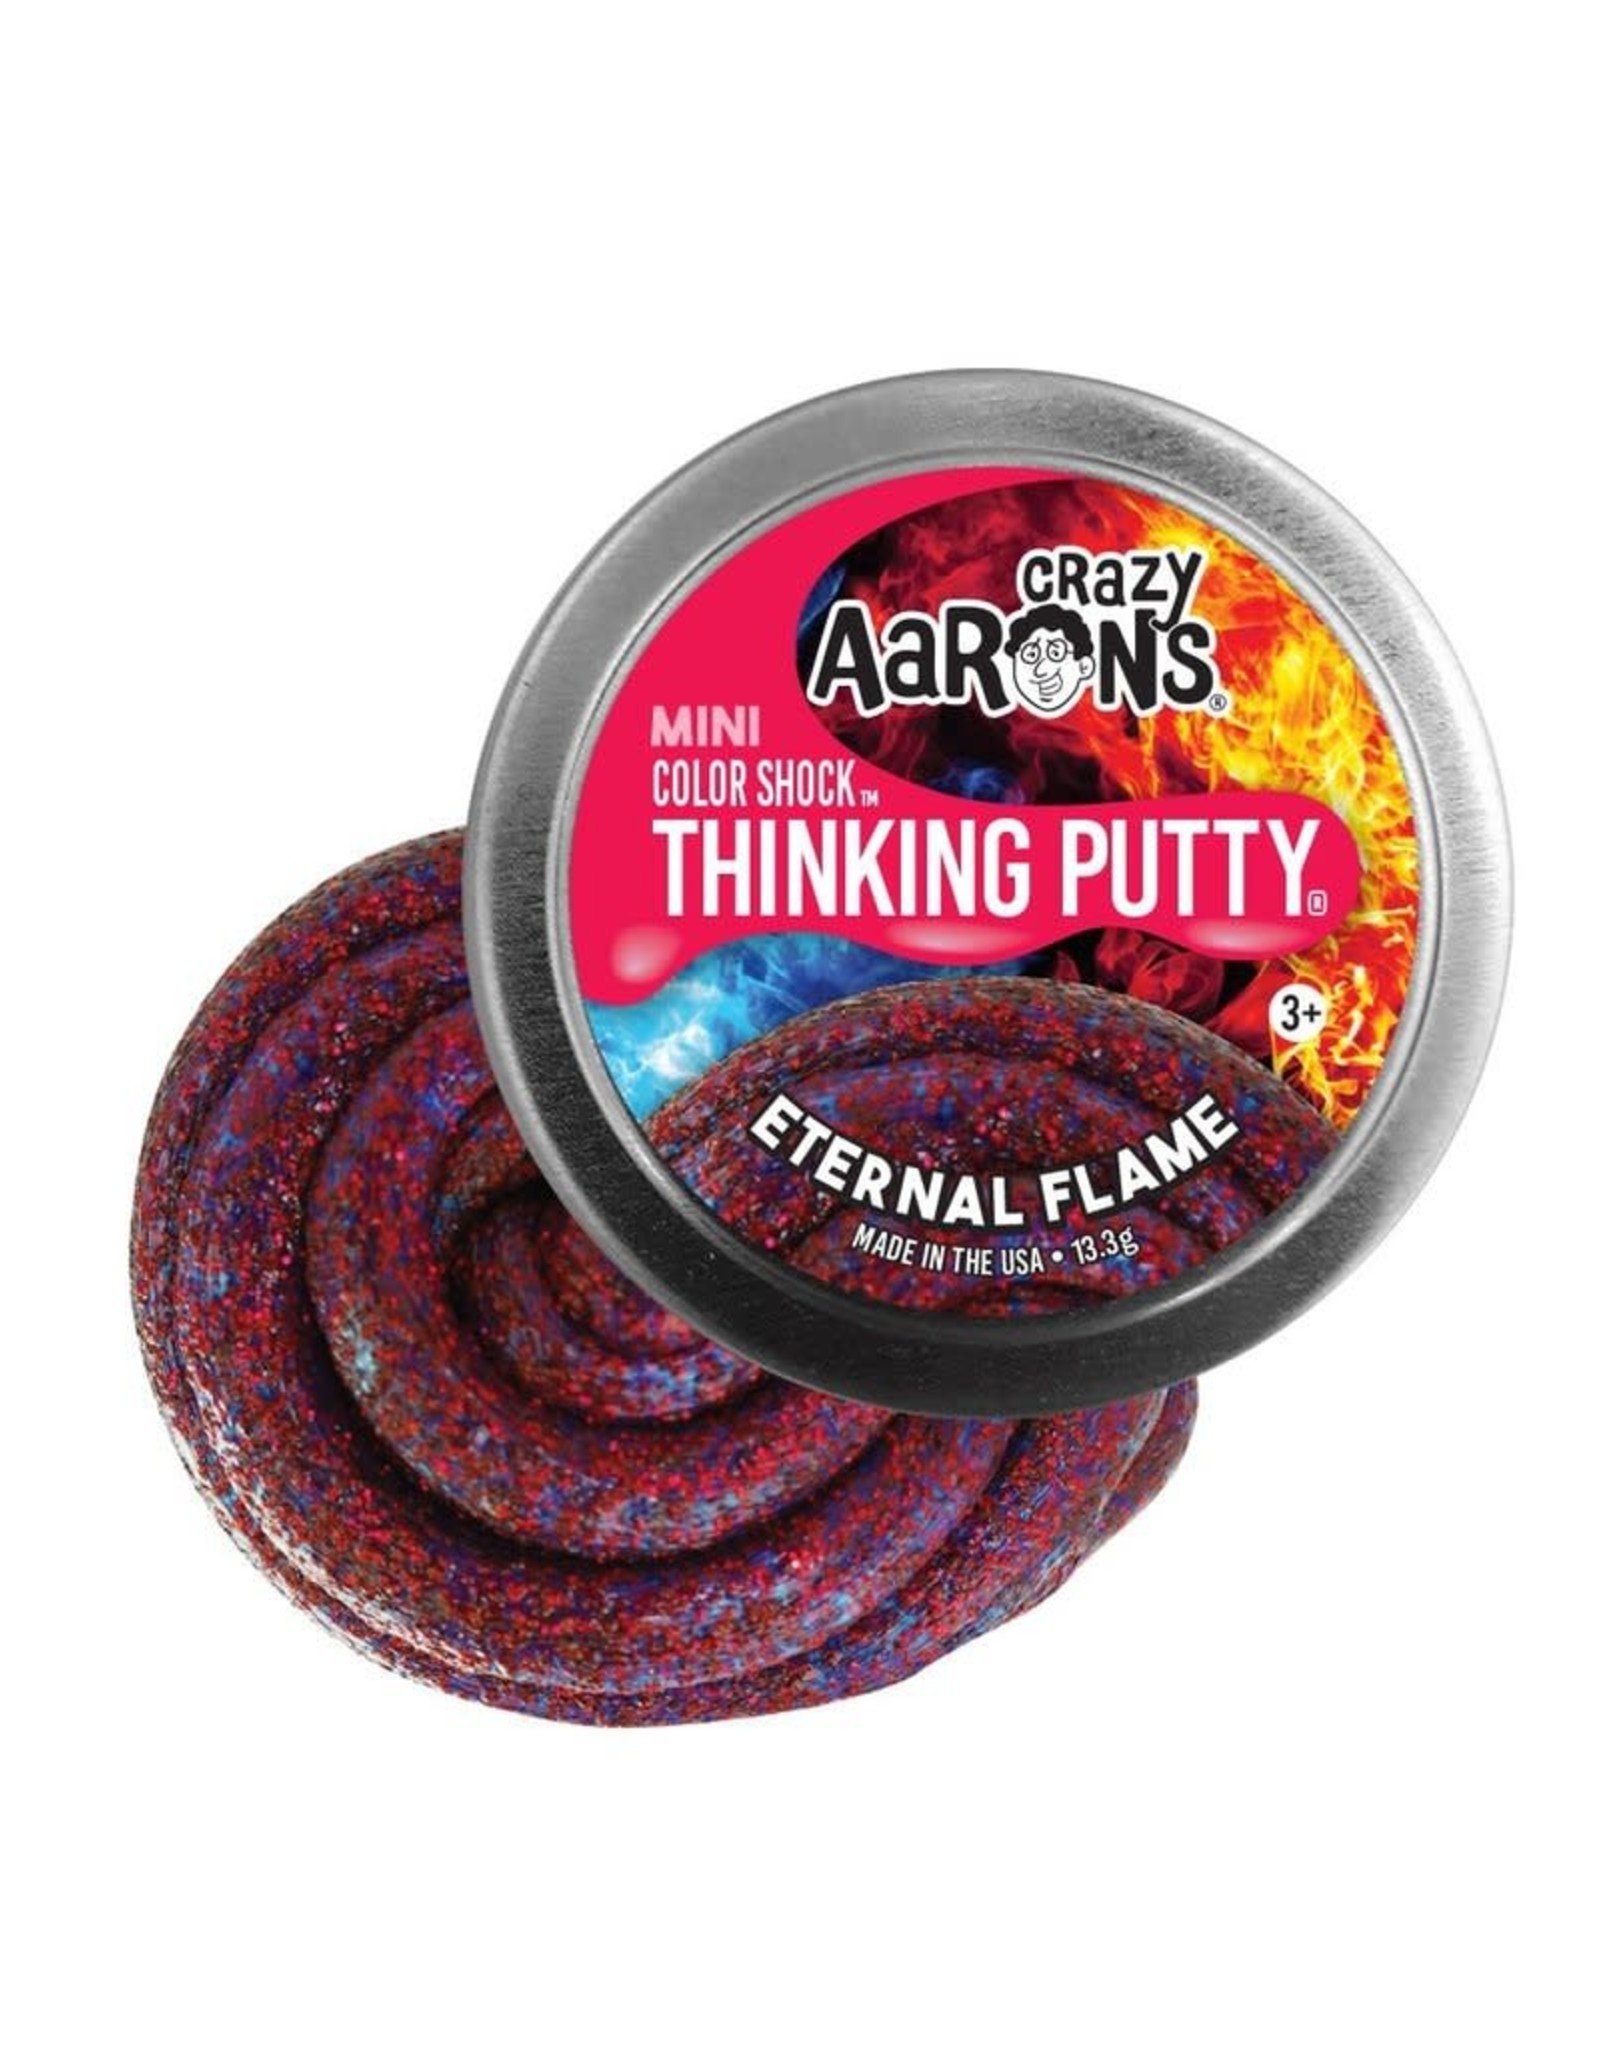 Crazy Aaron's Thinking Putty Crazy Aaron's Mini Tin -  Eternal Flame (Color Shock)